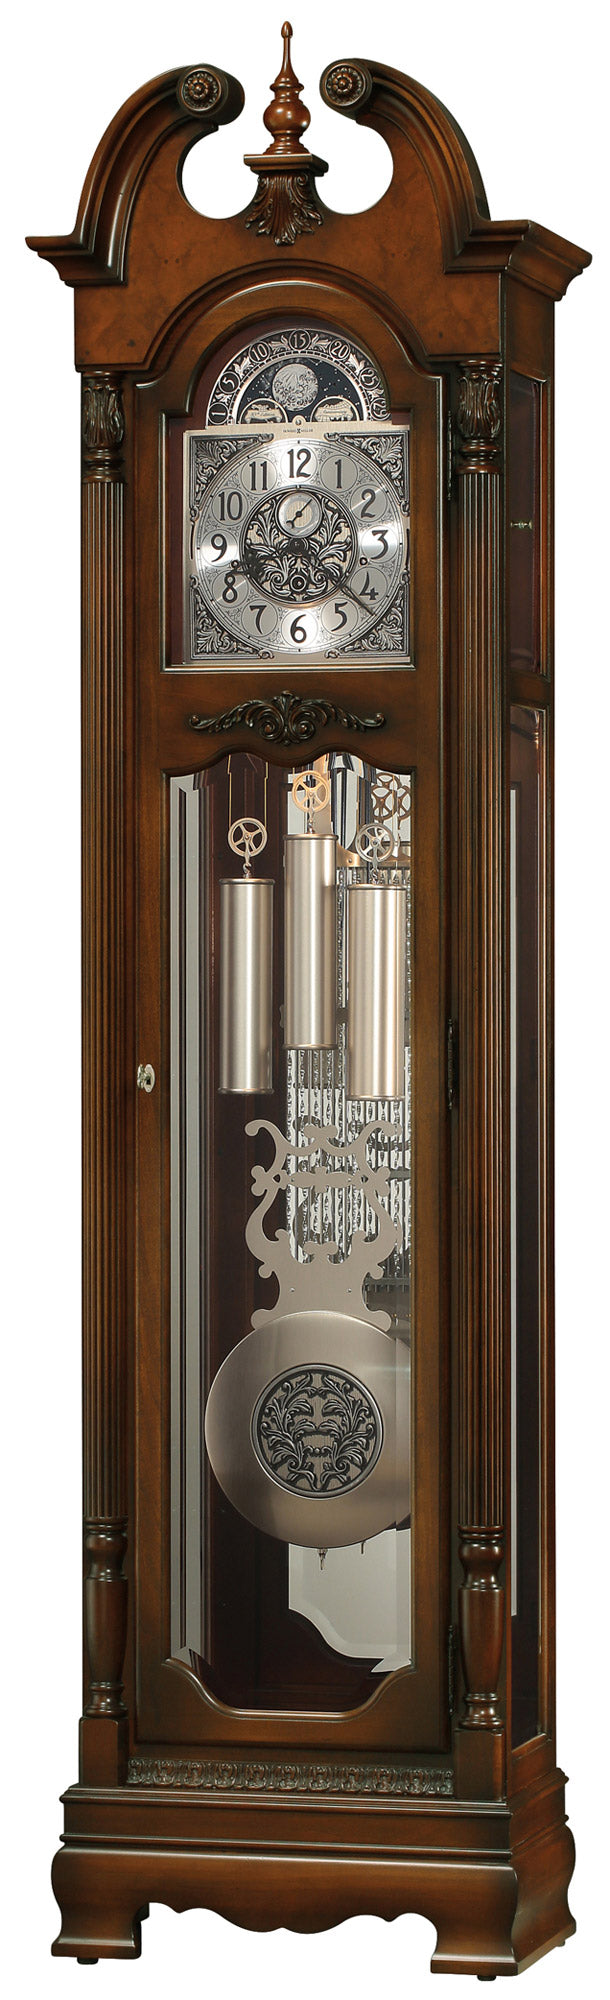 Grayland Grandfather Clock by Howard Miller